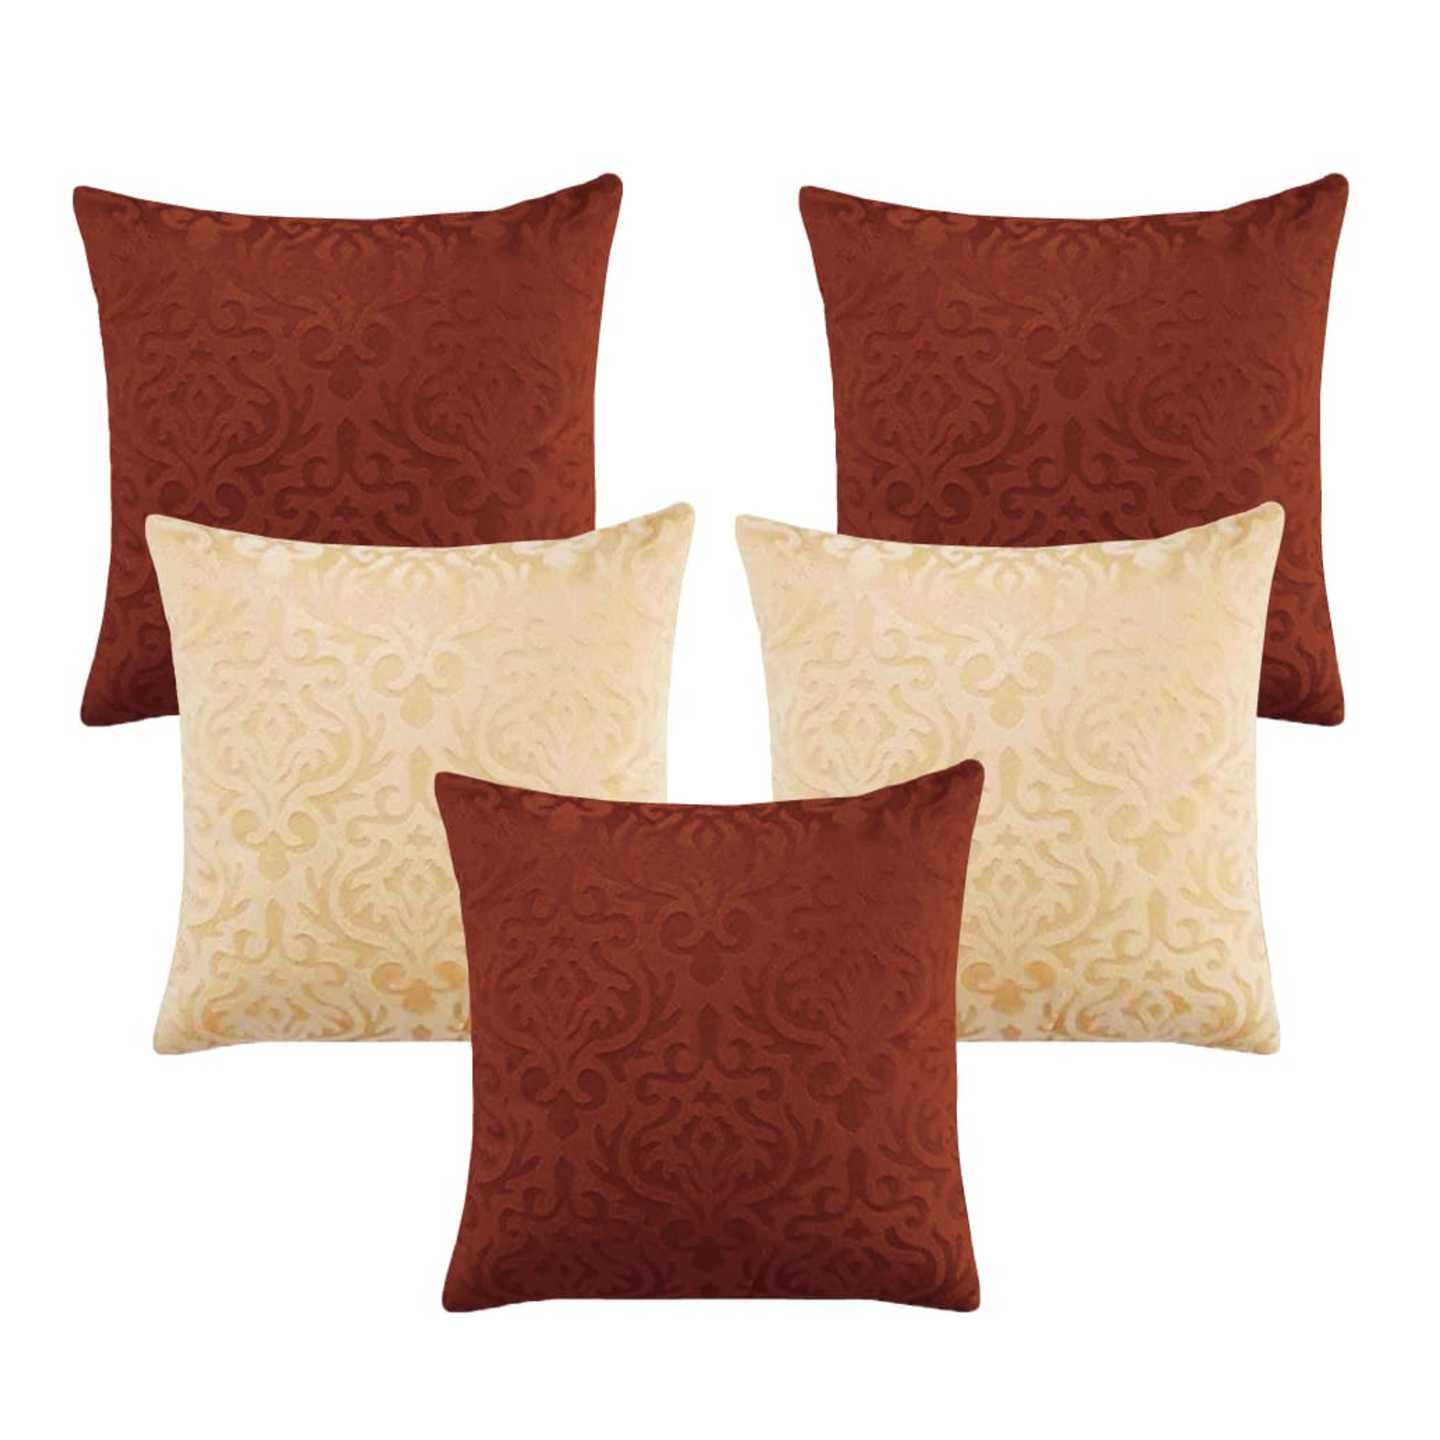 Handtex Home Velvet Cushion Covers 40.64x40.64 cm16x16 inches, Multicolour - Set of 5 G-Brown - Beige